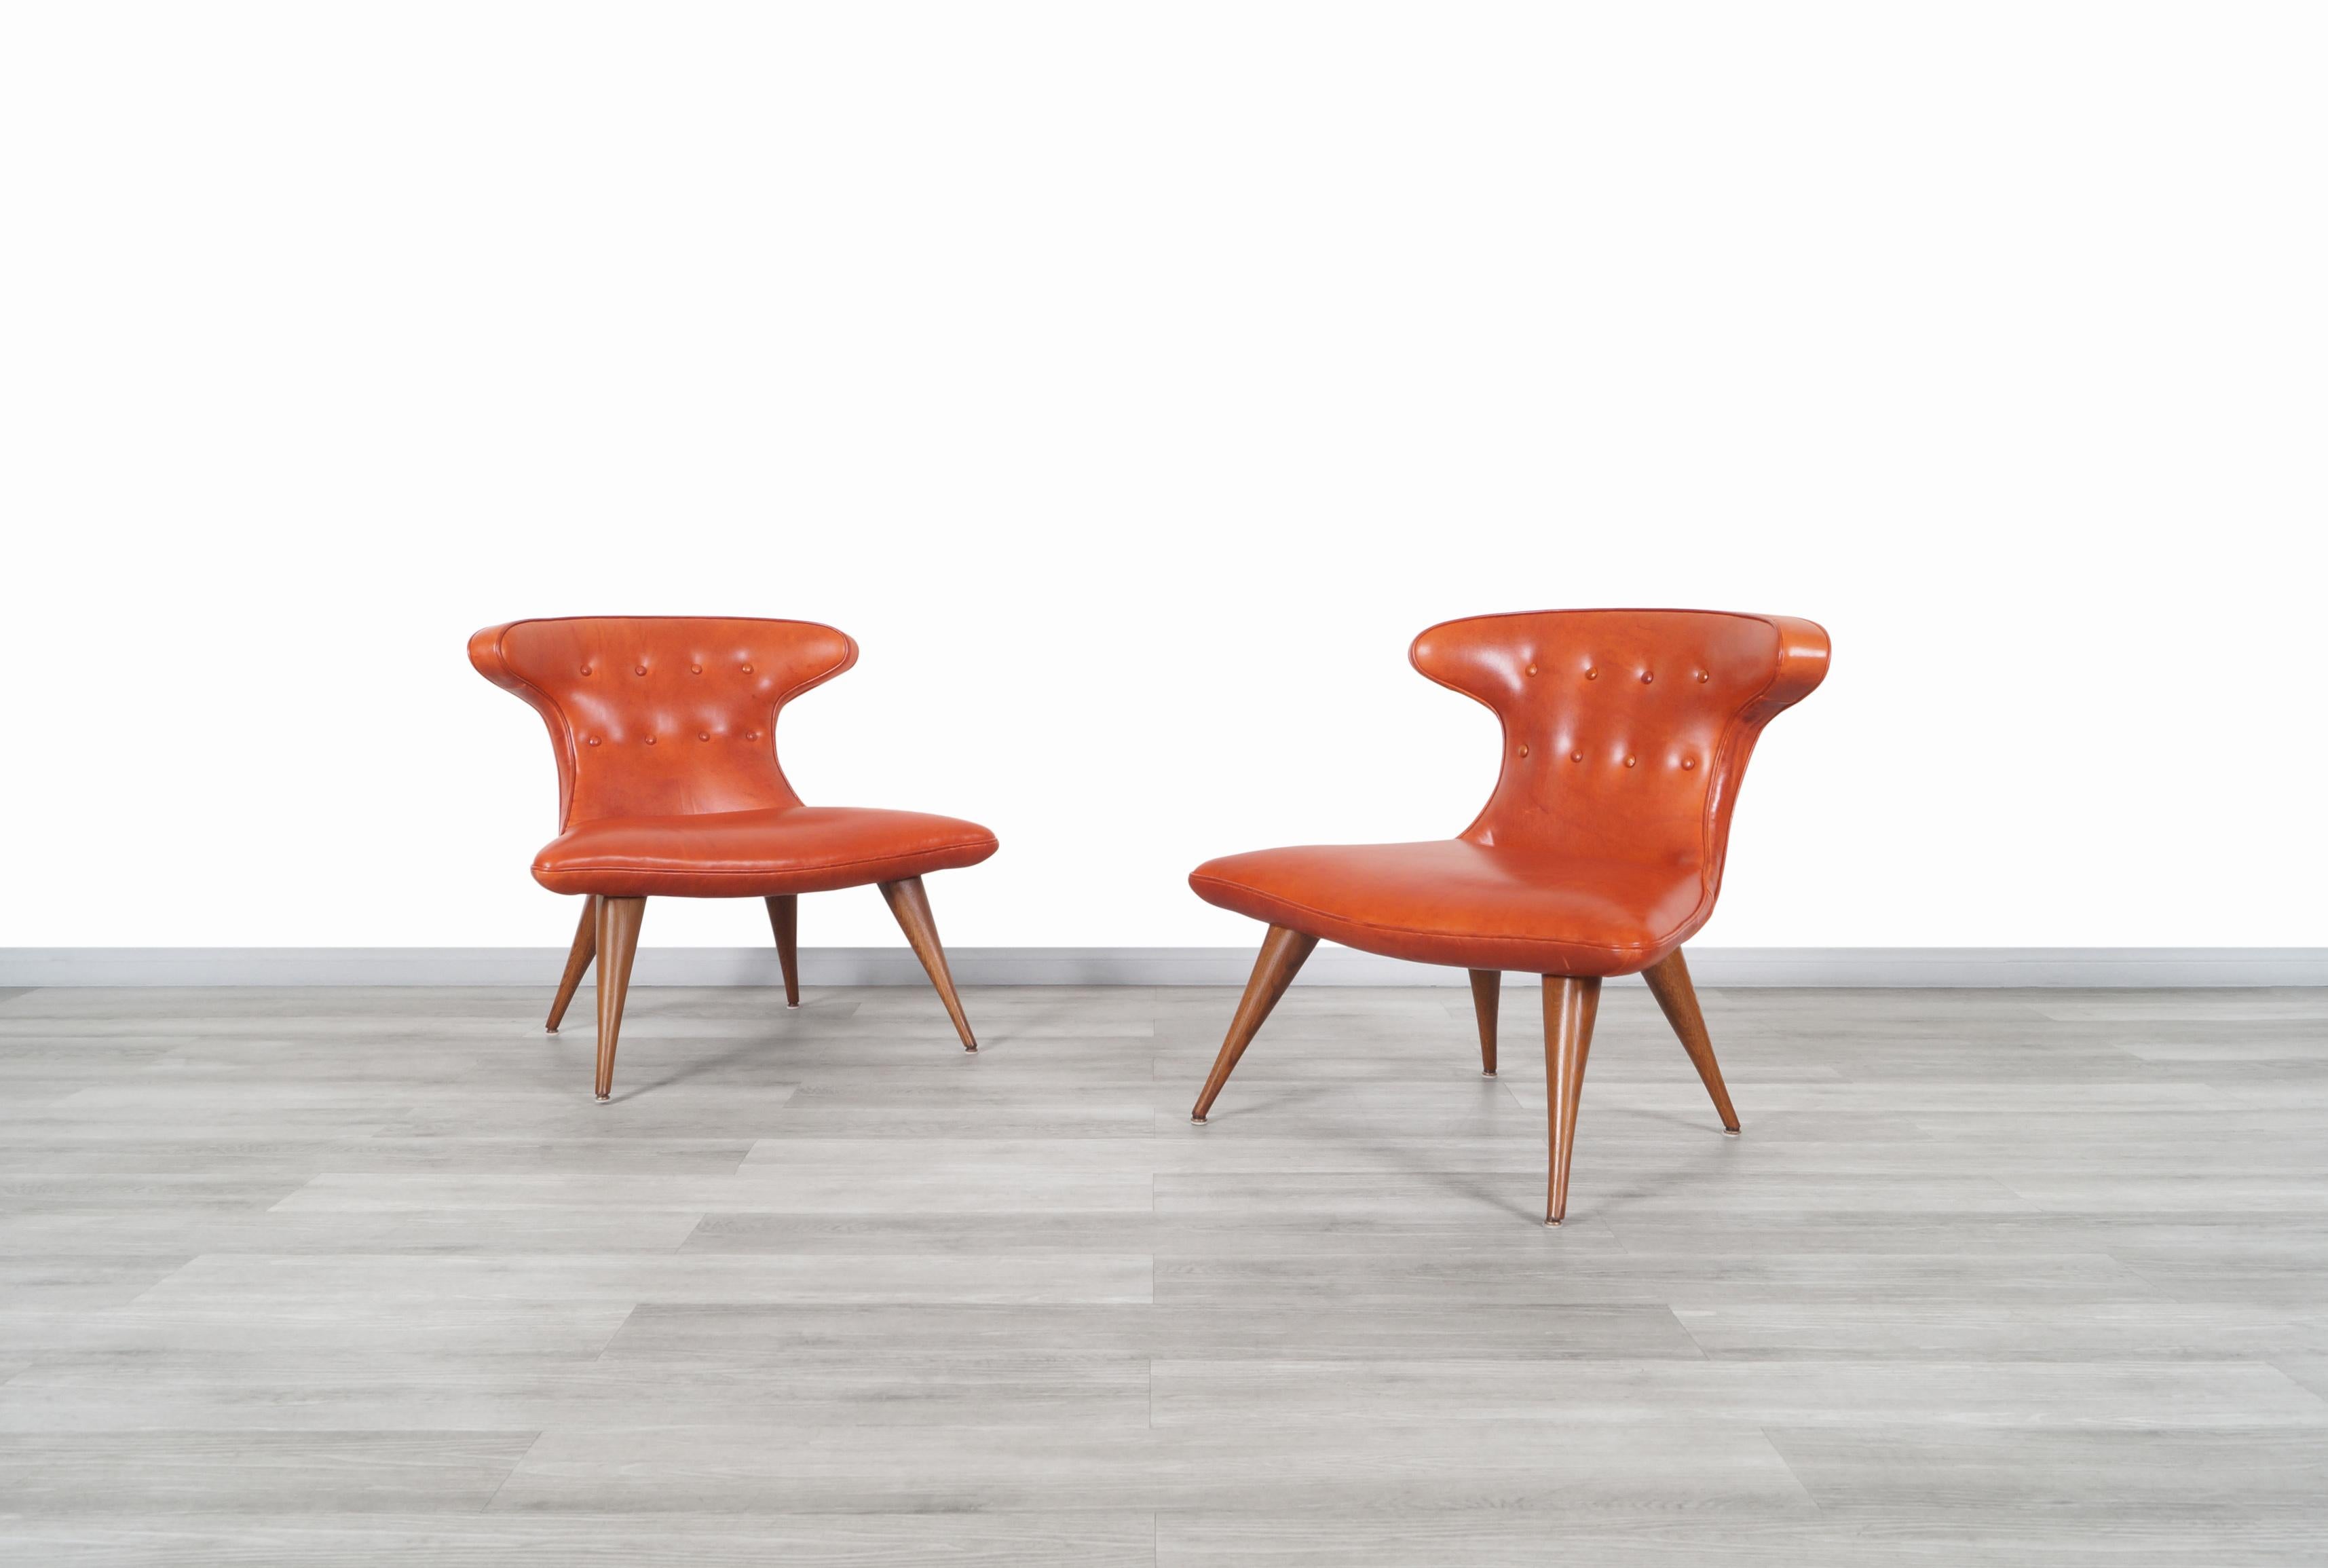 Exceptional vintage leather “Horn” chairs designed in the manner of Karpen of California and manufactured in the United States, circa 1960s. These chairs have an innovative design that stands out for its rounded edges. Each chair has been